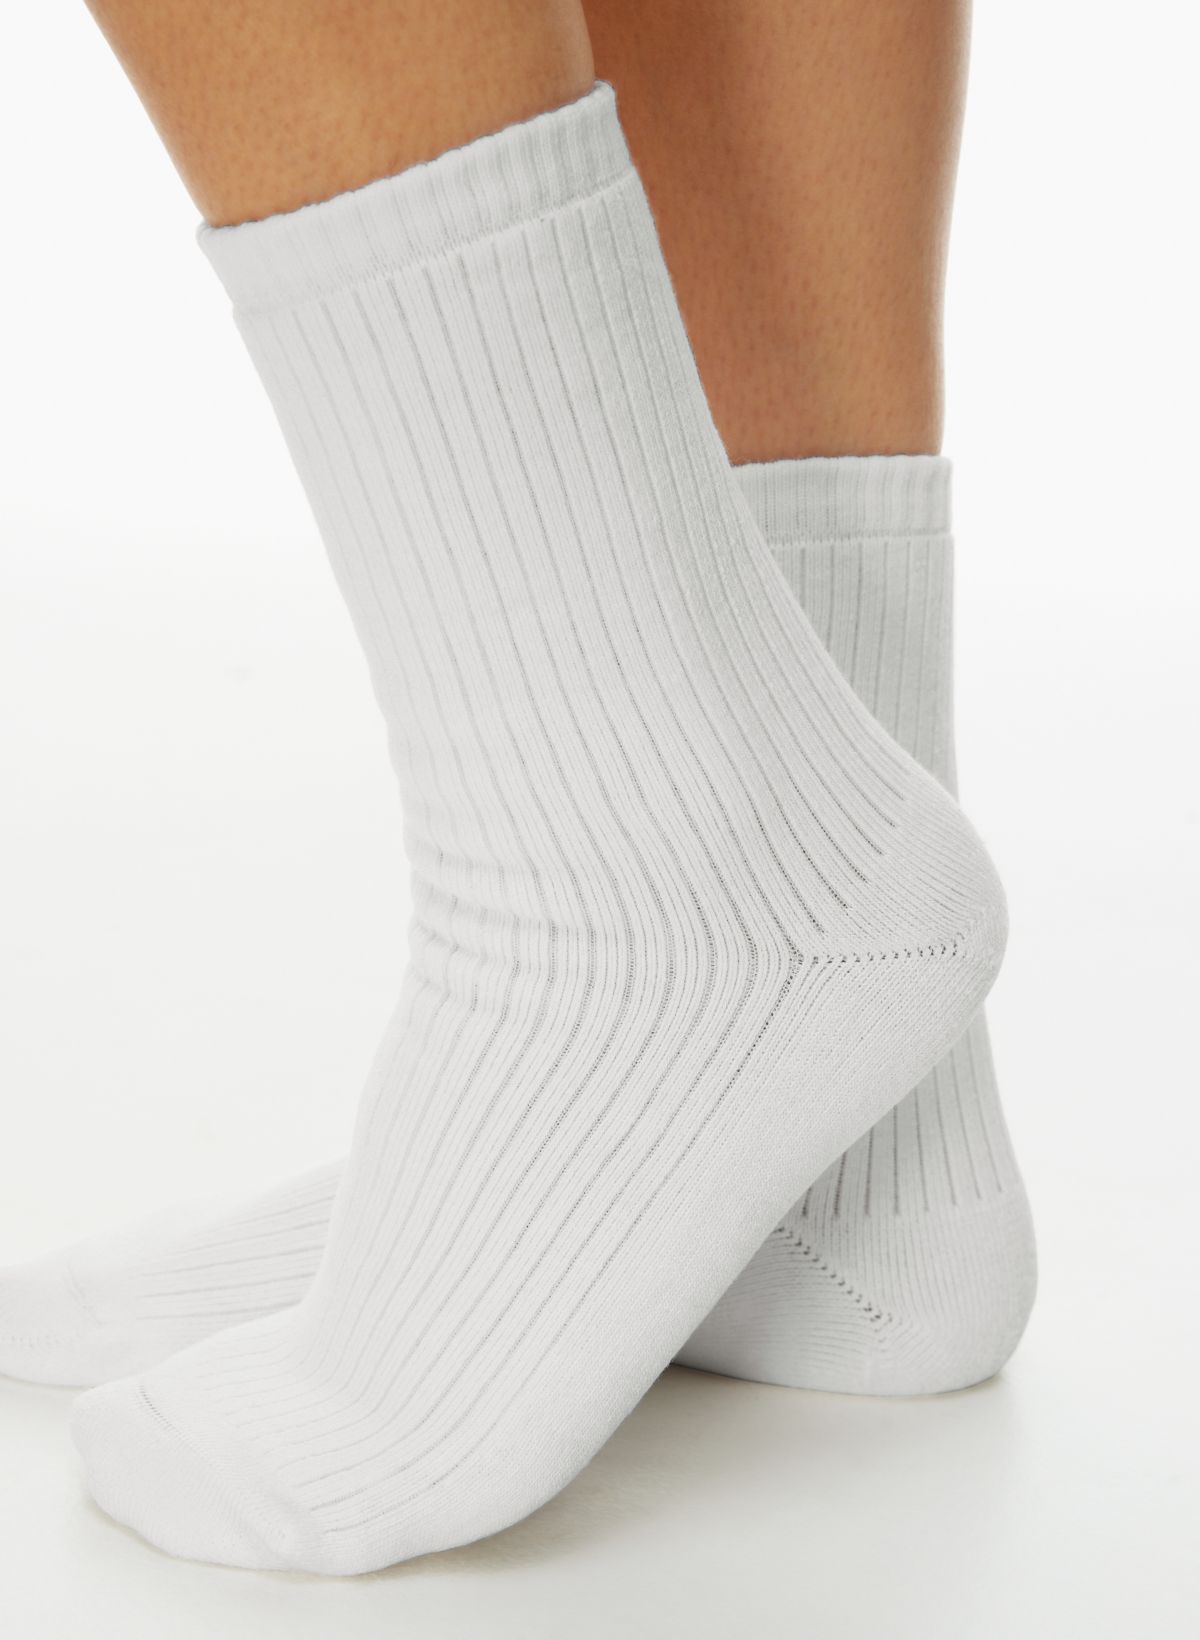 Extra Wide Cotton Comfort Fit Dress Socks 3-PK Made in the USA